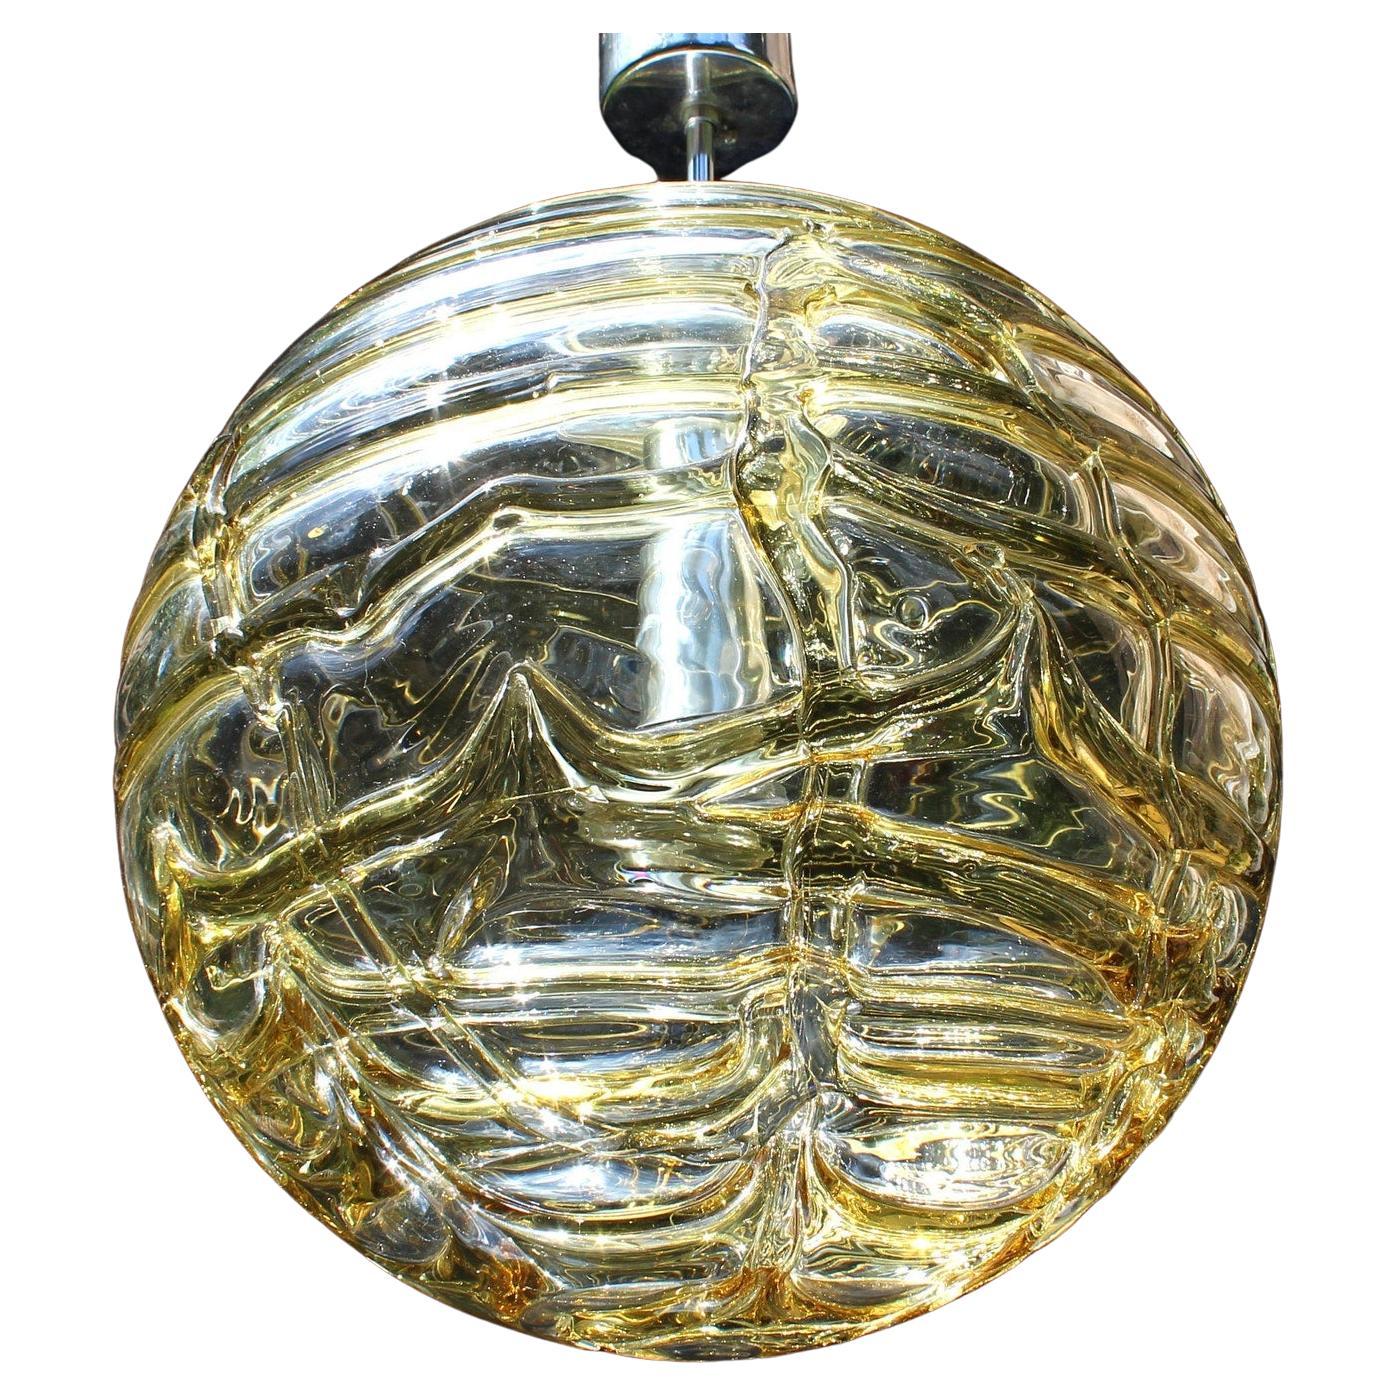 Heavy Doria Fürth crystal glass globe pendant light Germany 1970s

1 light E27

Measures: Diameter 14 inches height of the body 13 original height 29 inches weight 13 LBS

Fantastic large Biomorphic 1 light (e27) hand-blown glass globe pendant